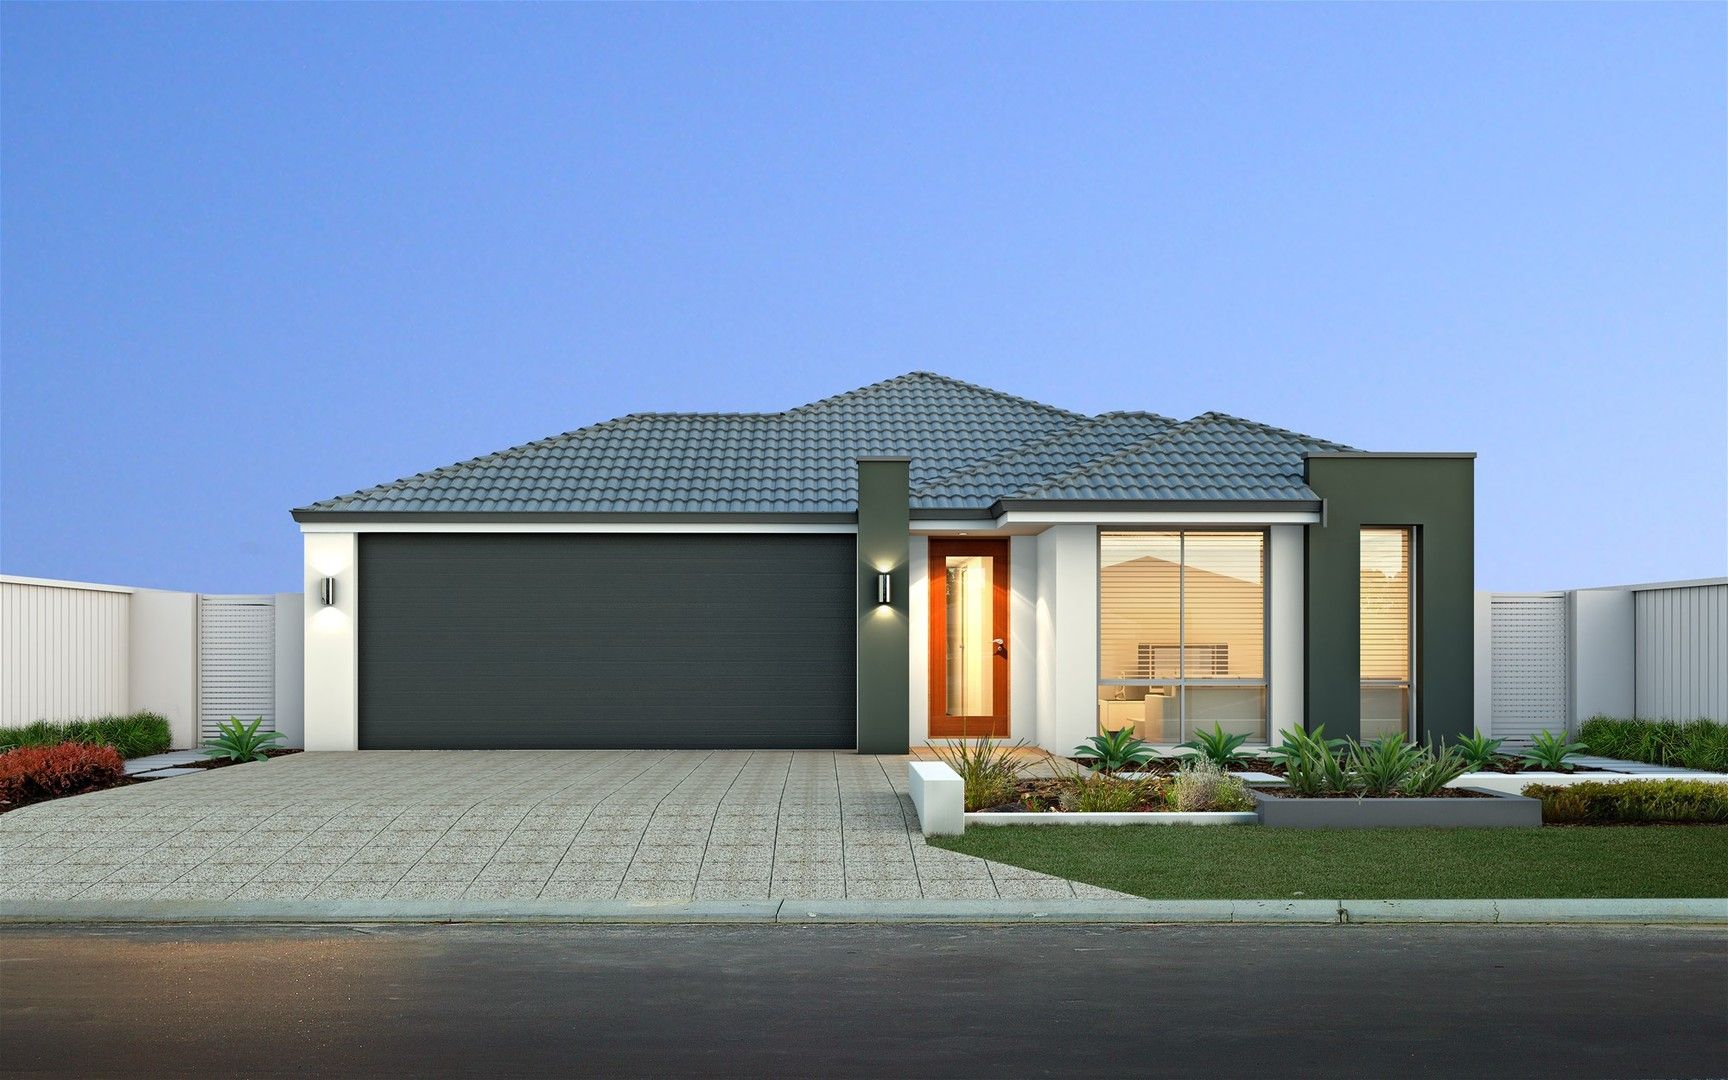 4 bedrooms New House & Land in  SOUTH YUNDERUP WA, 6208